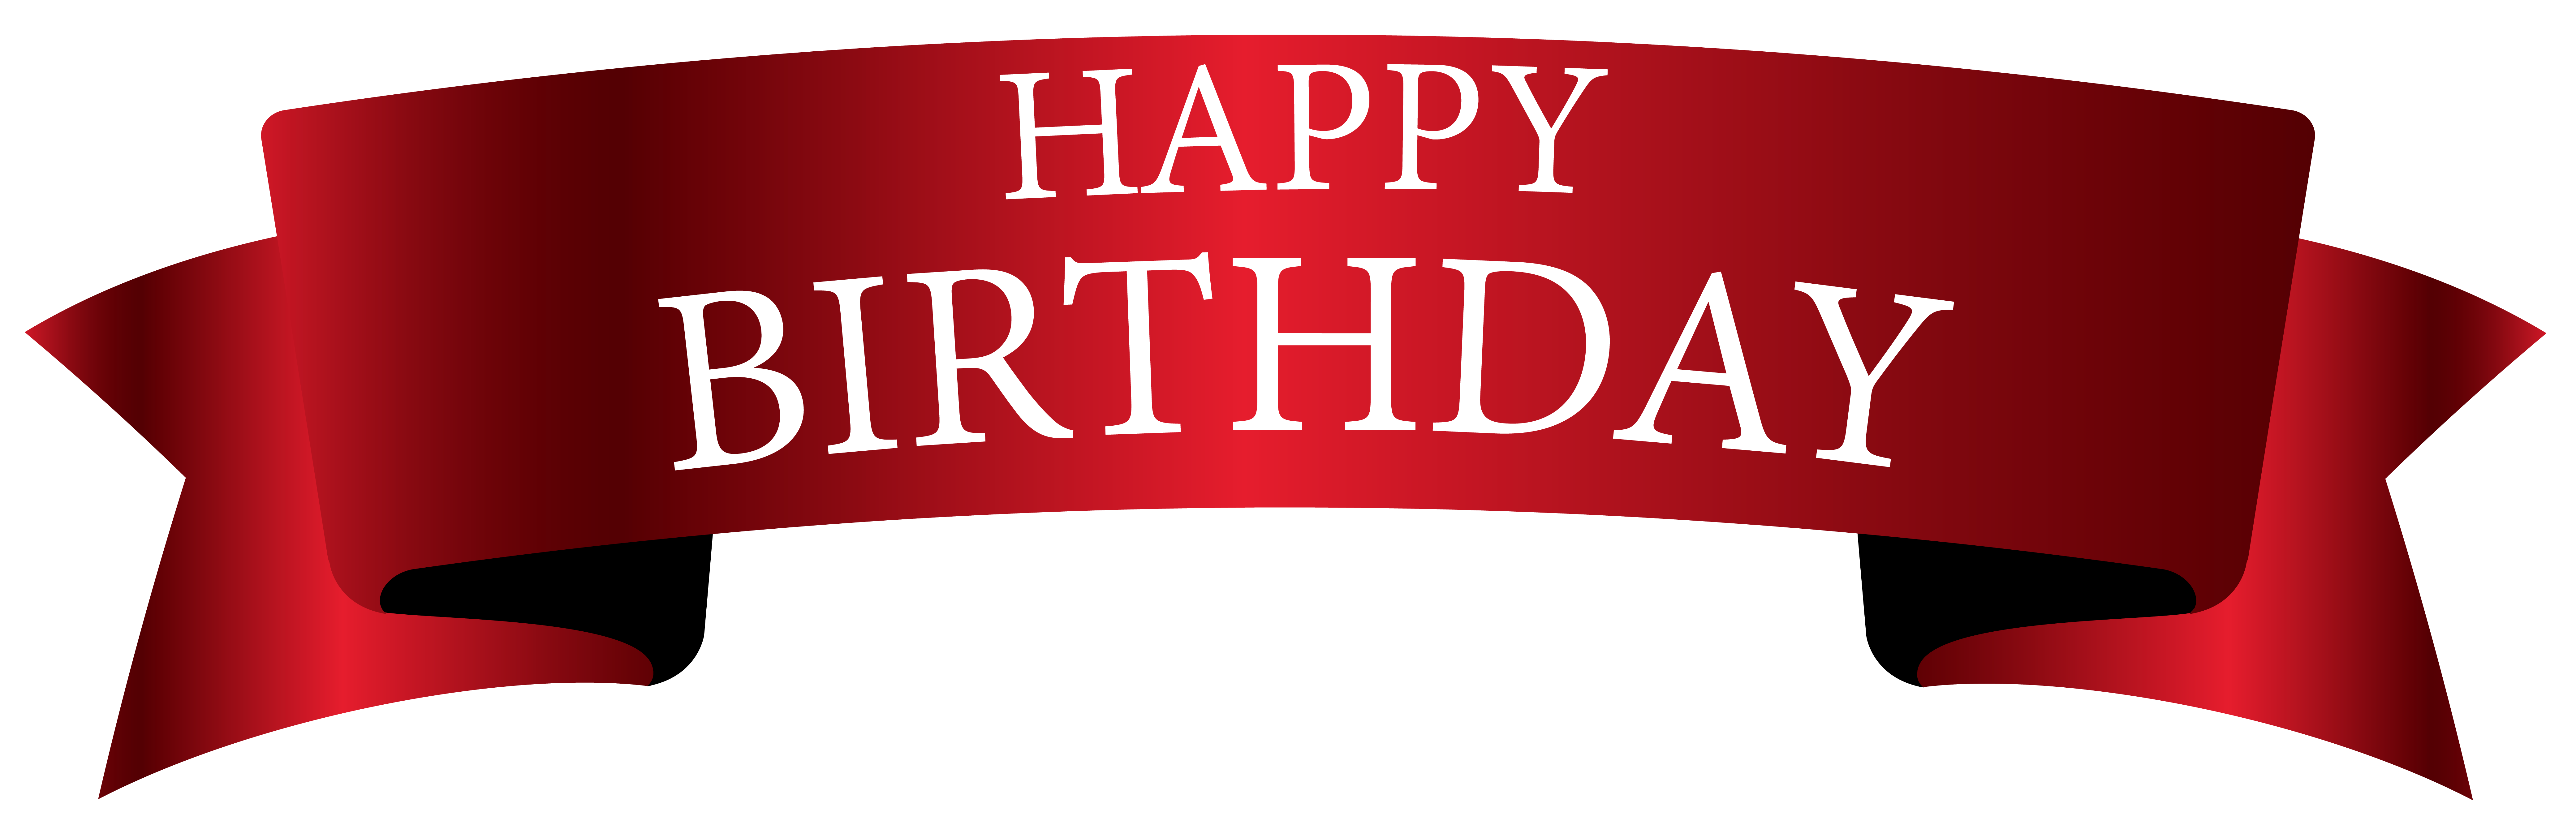 Red Birthday Banner PNG Clipart Image Quality Image And Transparent PNG Free Clipart